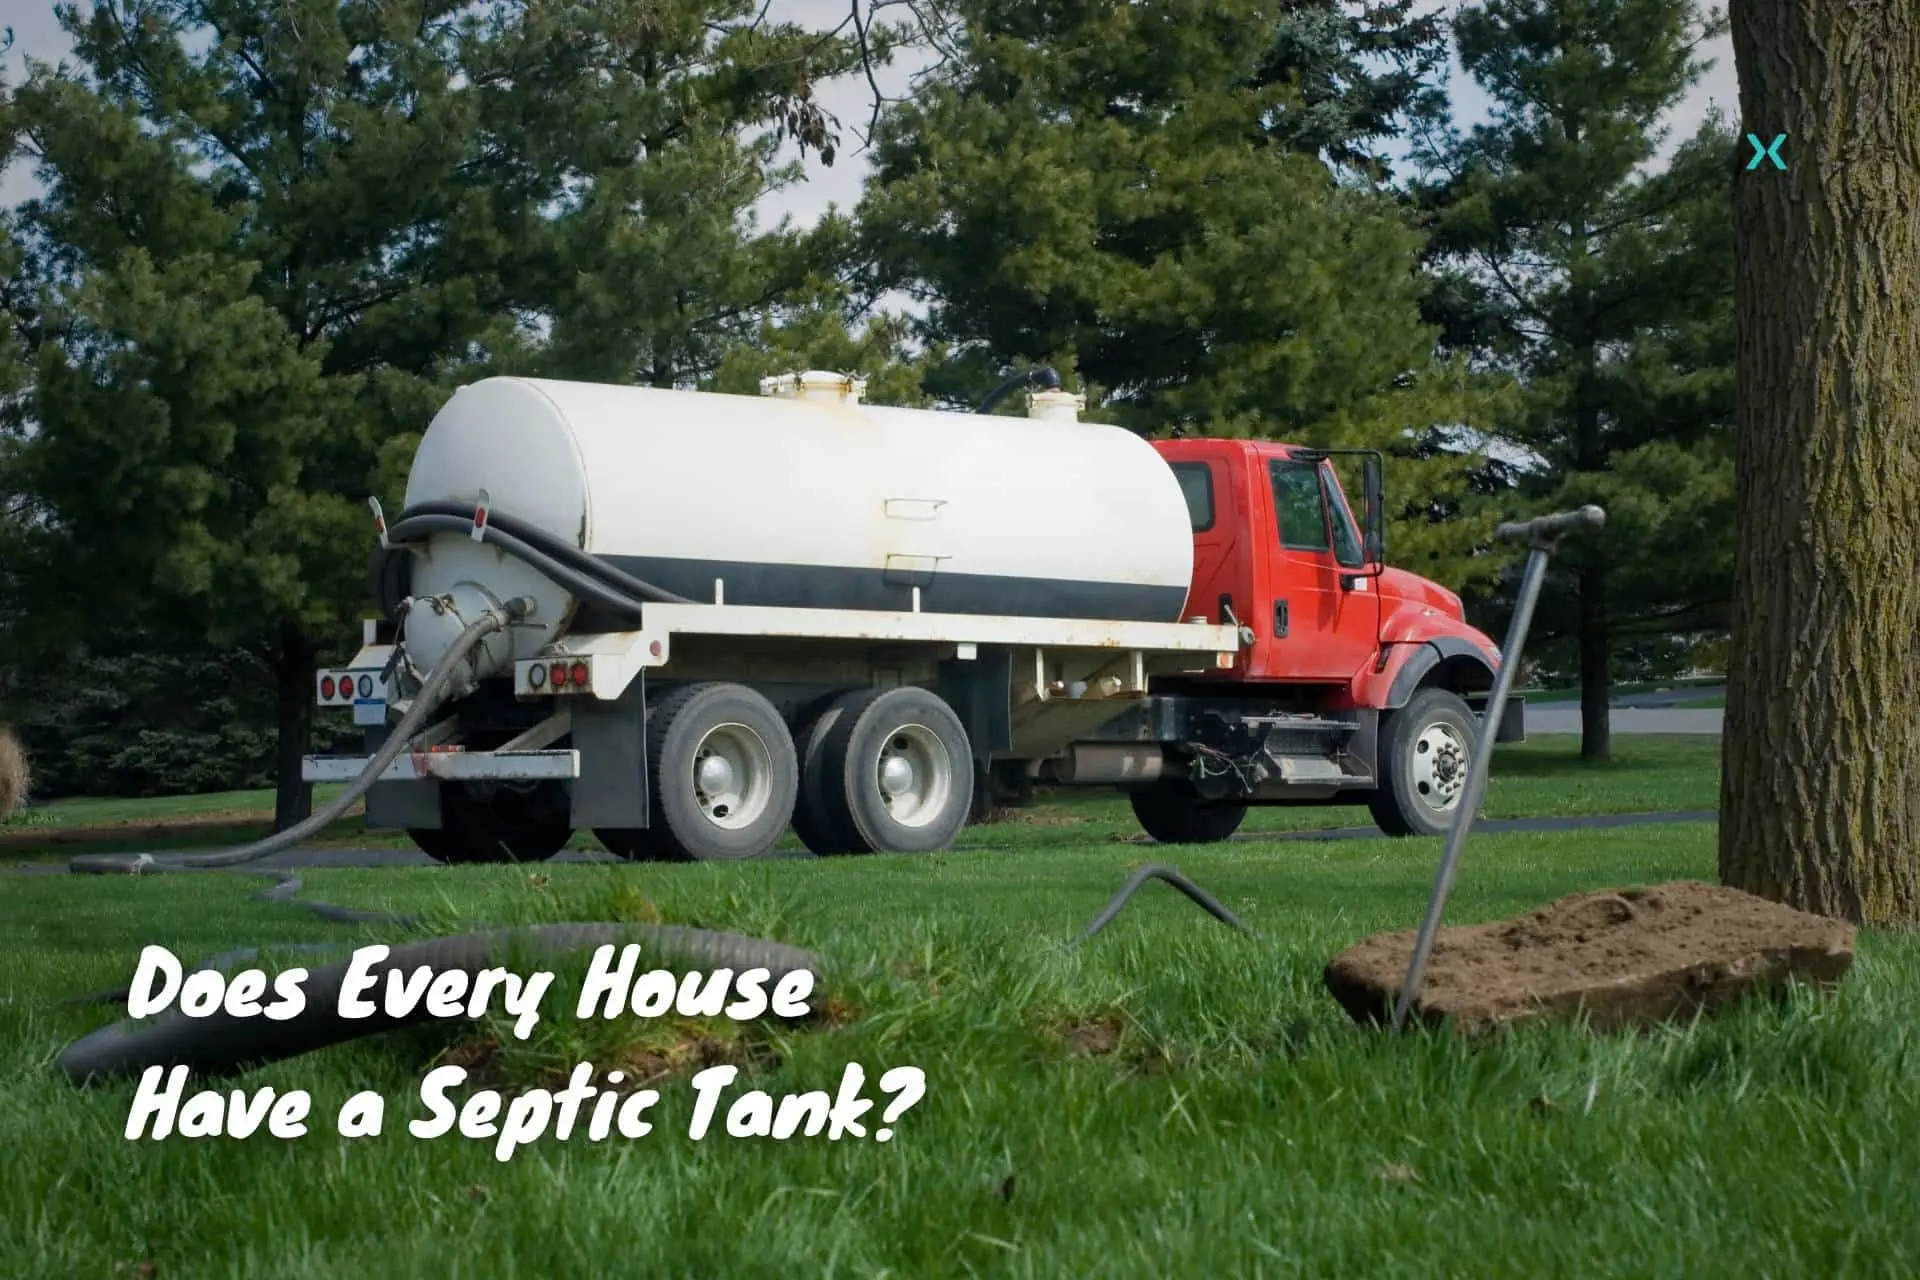 Does Every House Have a Septic Tank